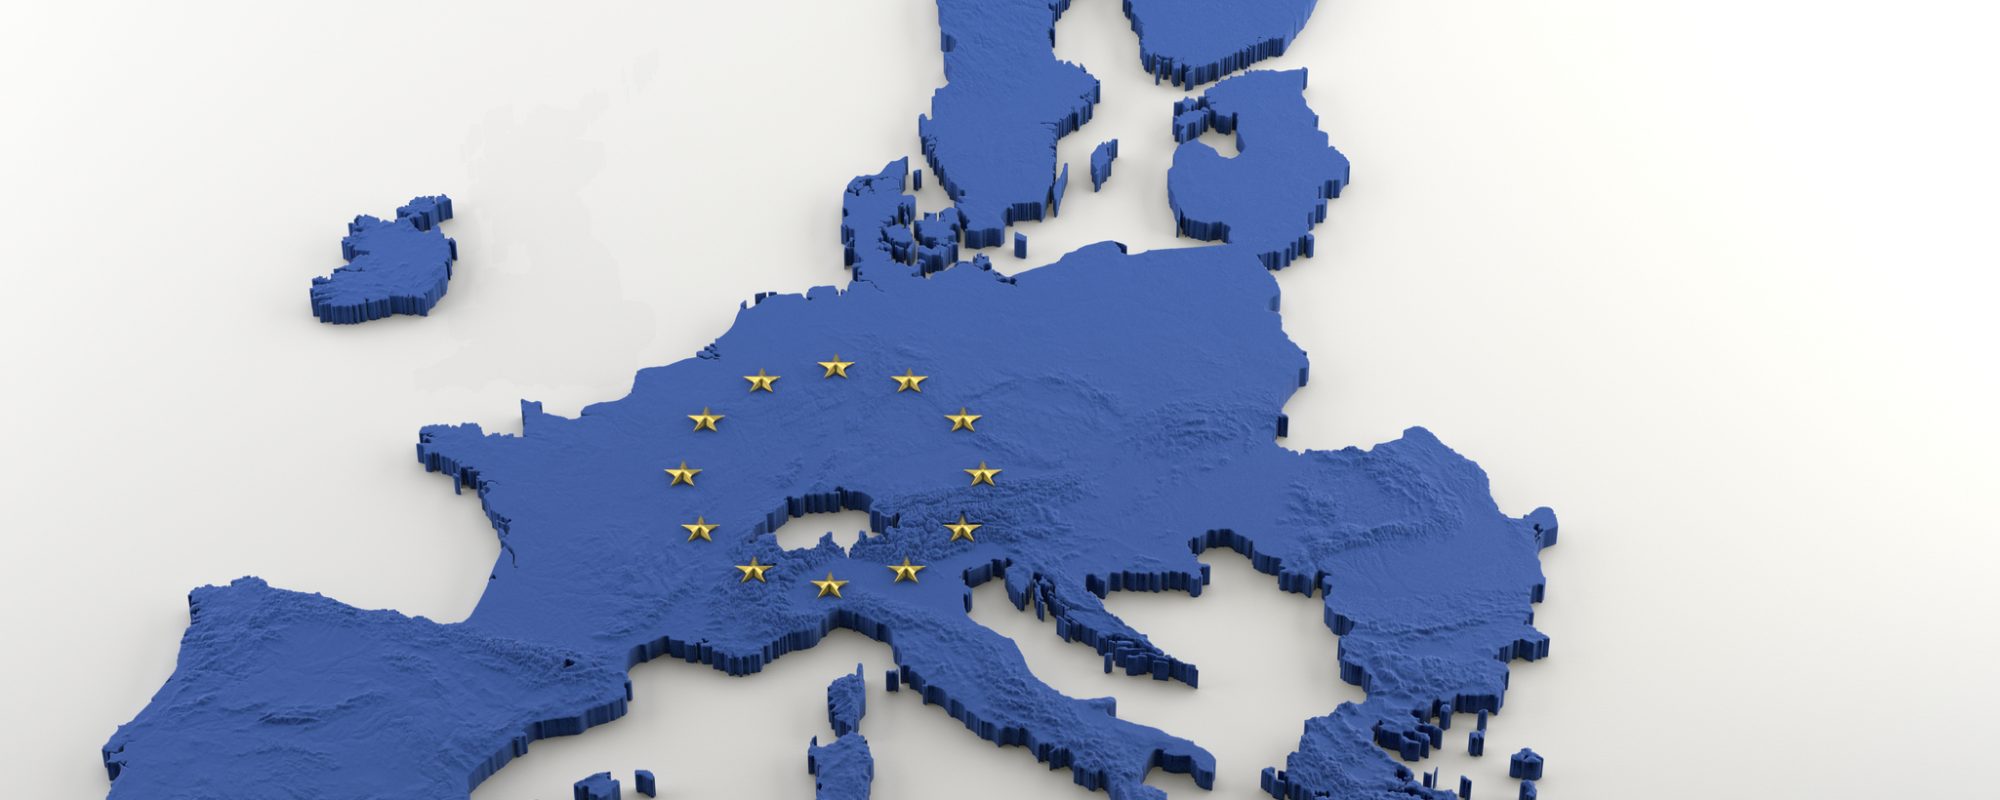 Extruded political Map of European Union with relief without United Kingdom after anticipated Brexit. Texture made of Blue EU flag with gold stars incrusted in 3D shape on a white background.